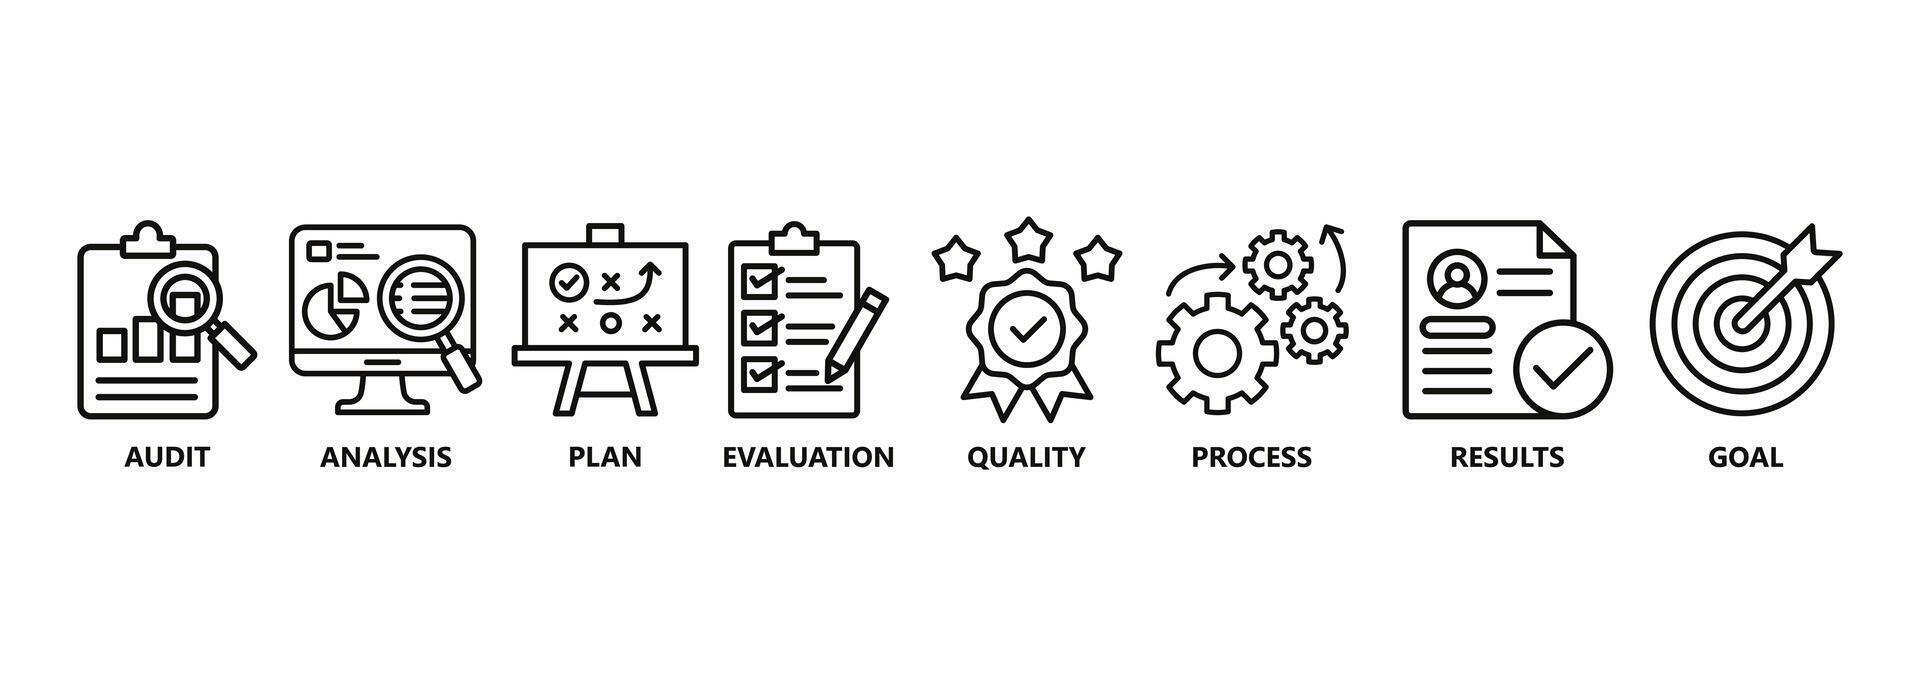 Assessment banner web icon vector illustration for accreditation and evaluation method on business and education with audit, analysis, plan, evaluation, quality,process,results and goal